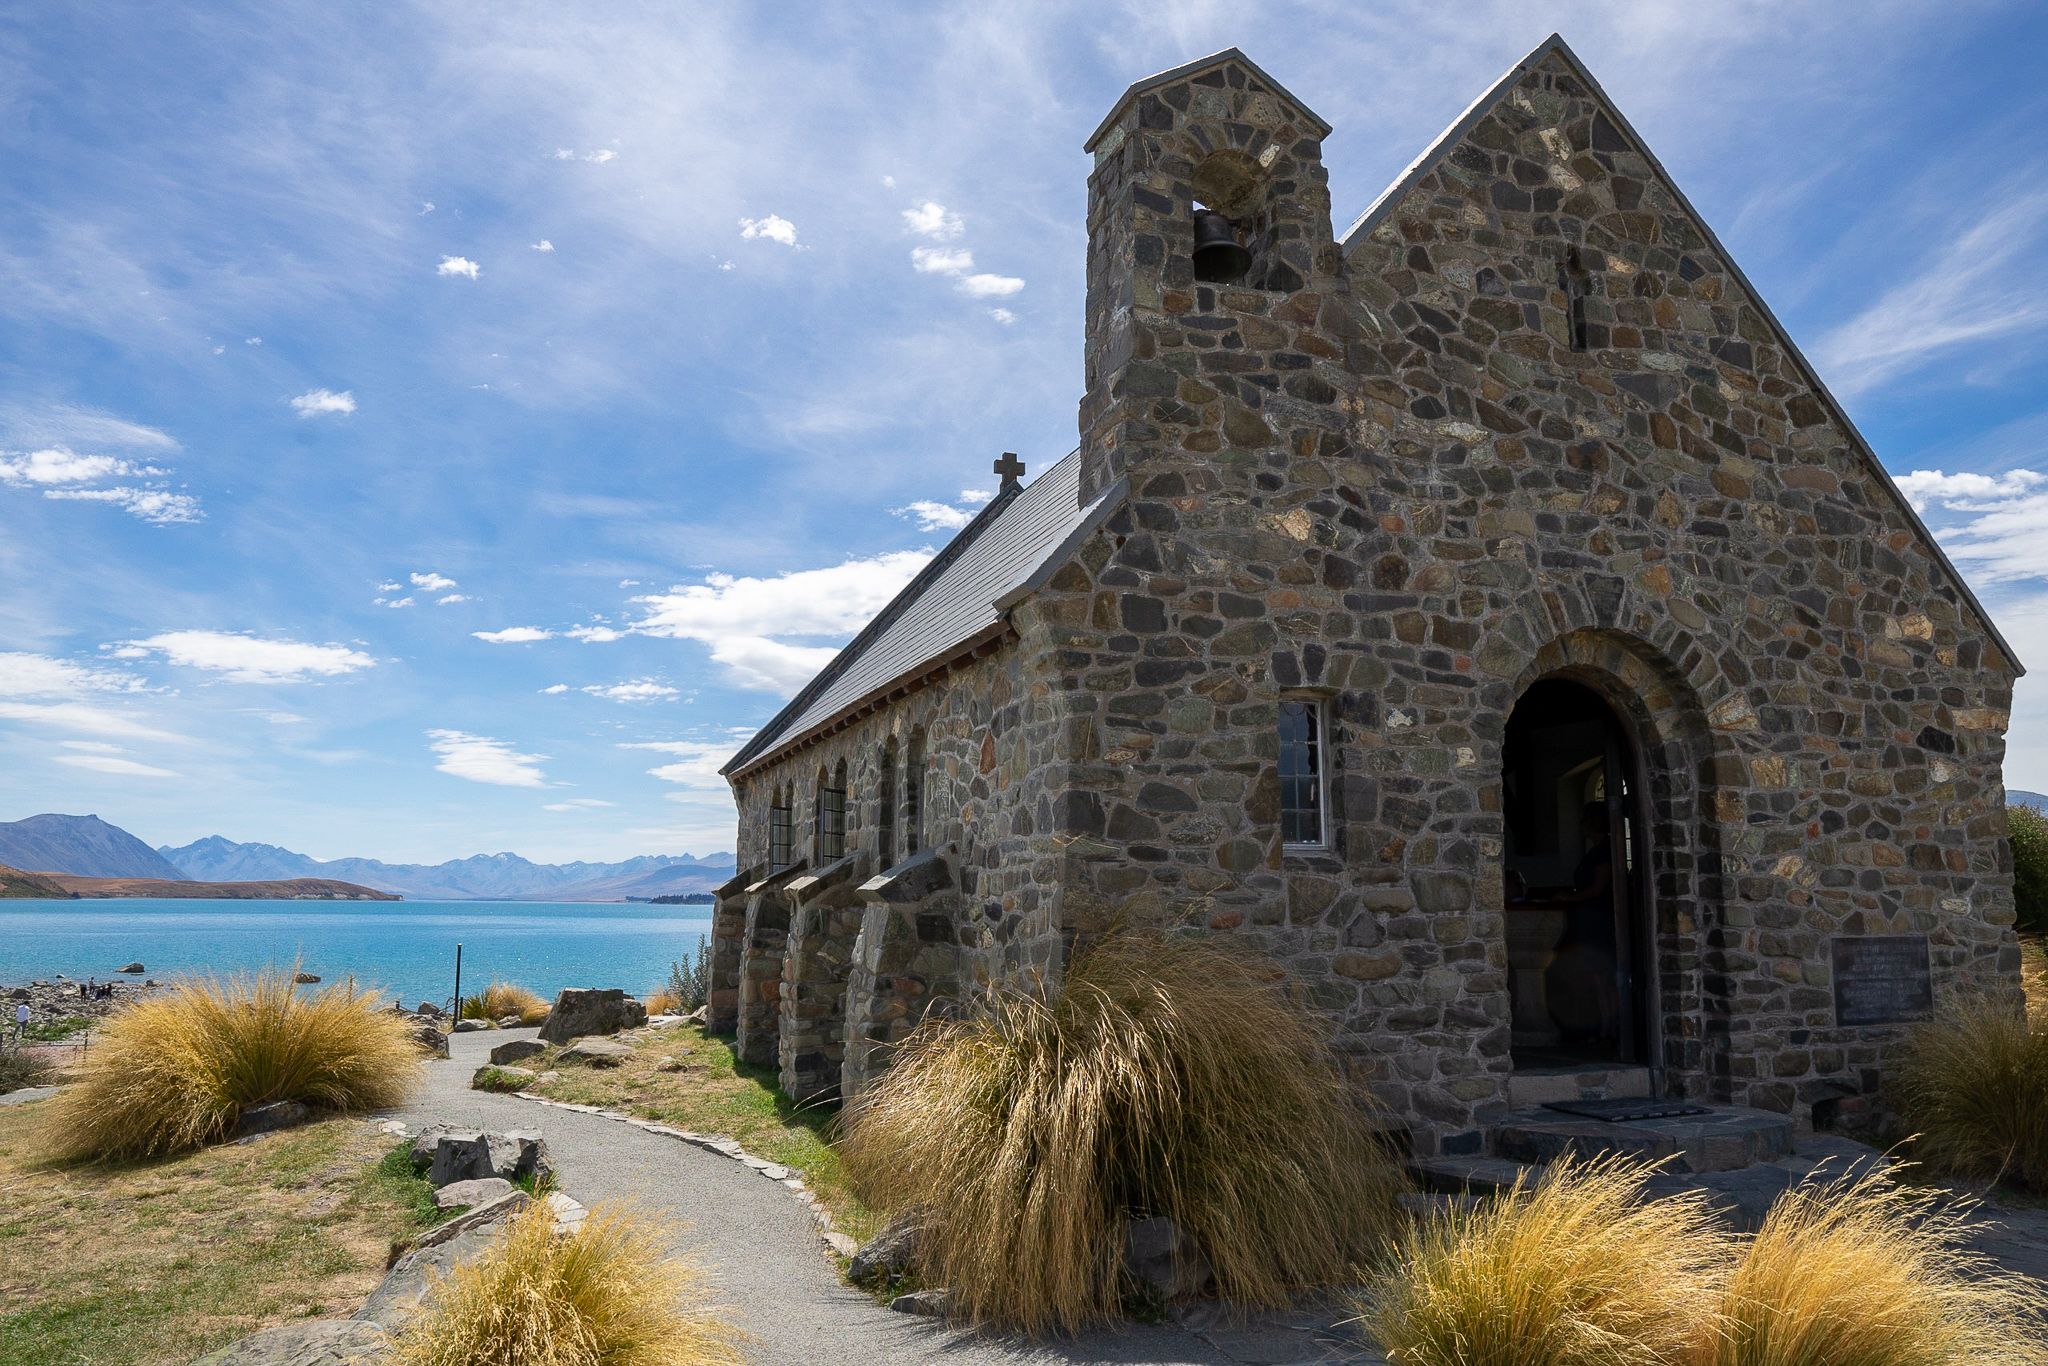 Tekapo is one of the best small towns in New Zealnds South Island